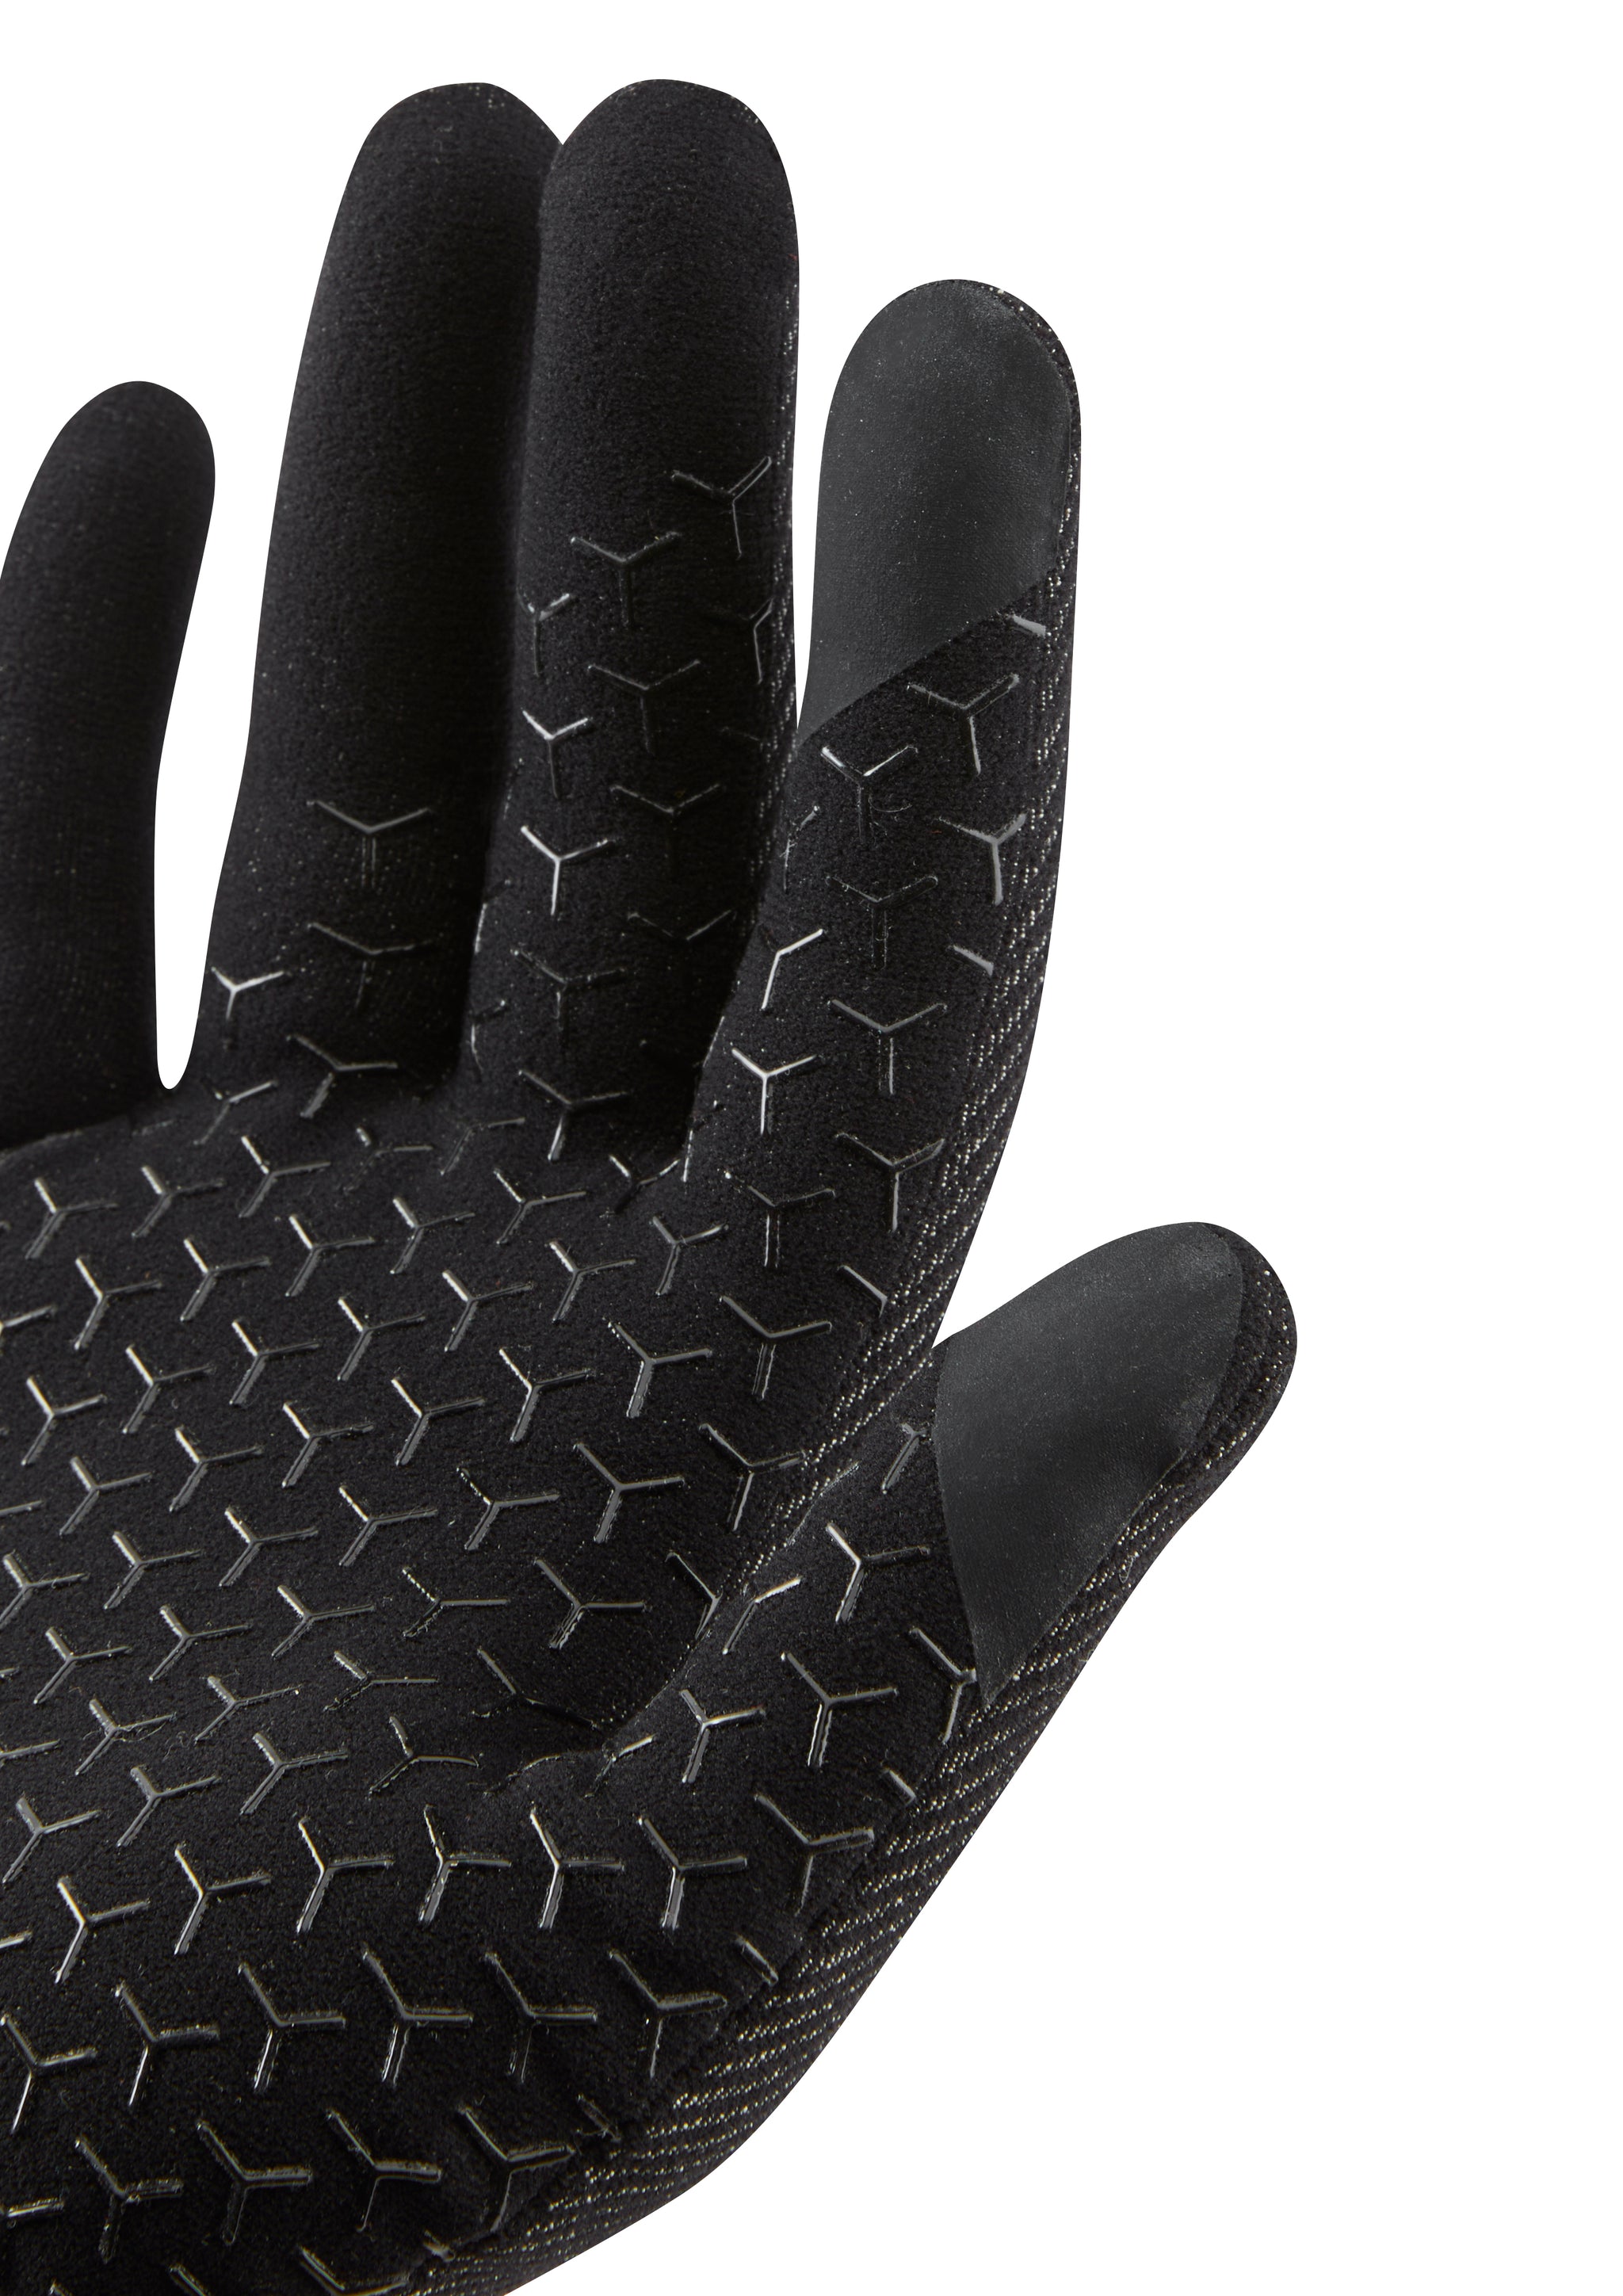 Rab Formknit Liner Gloves - Outfitters Store